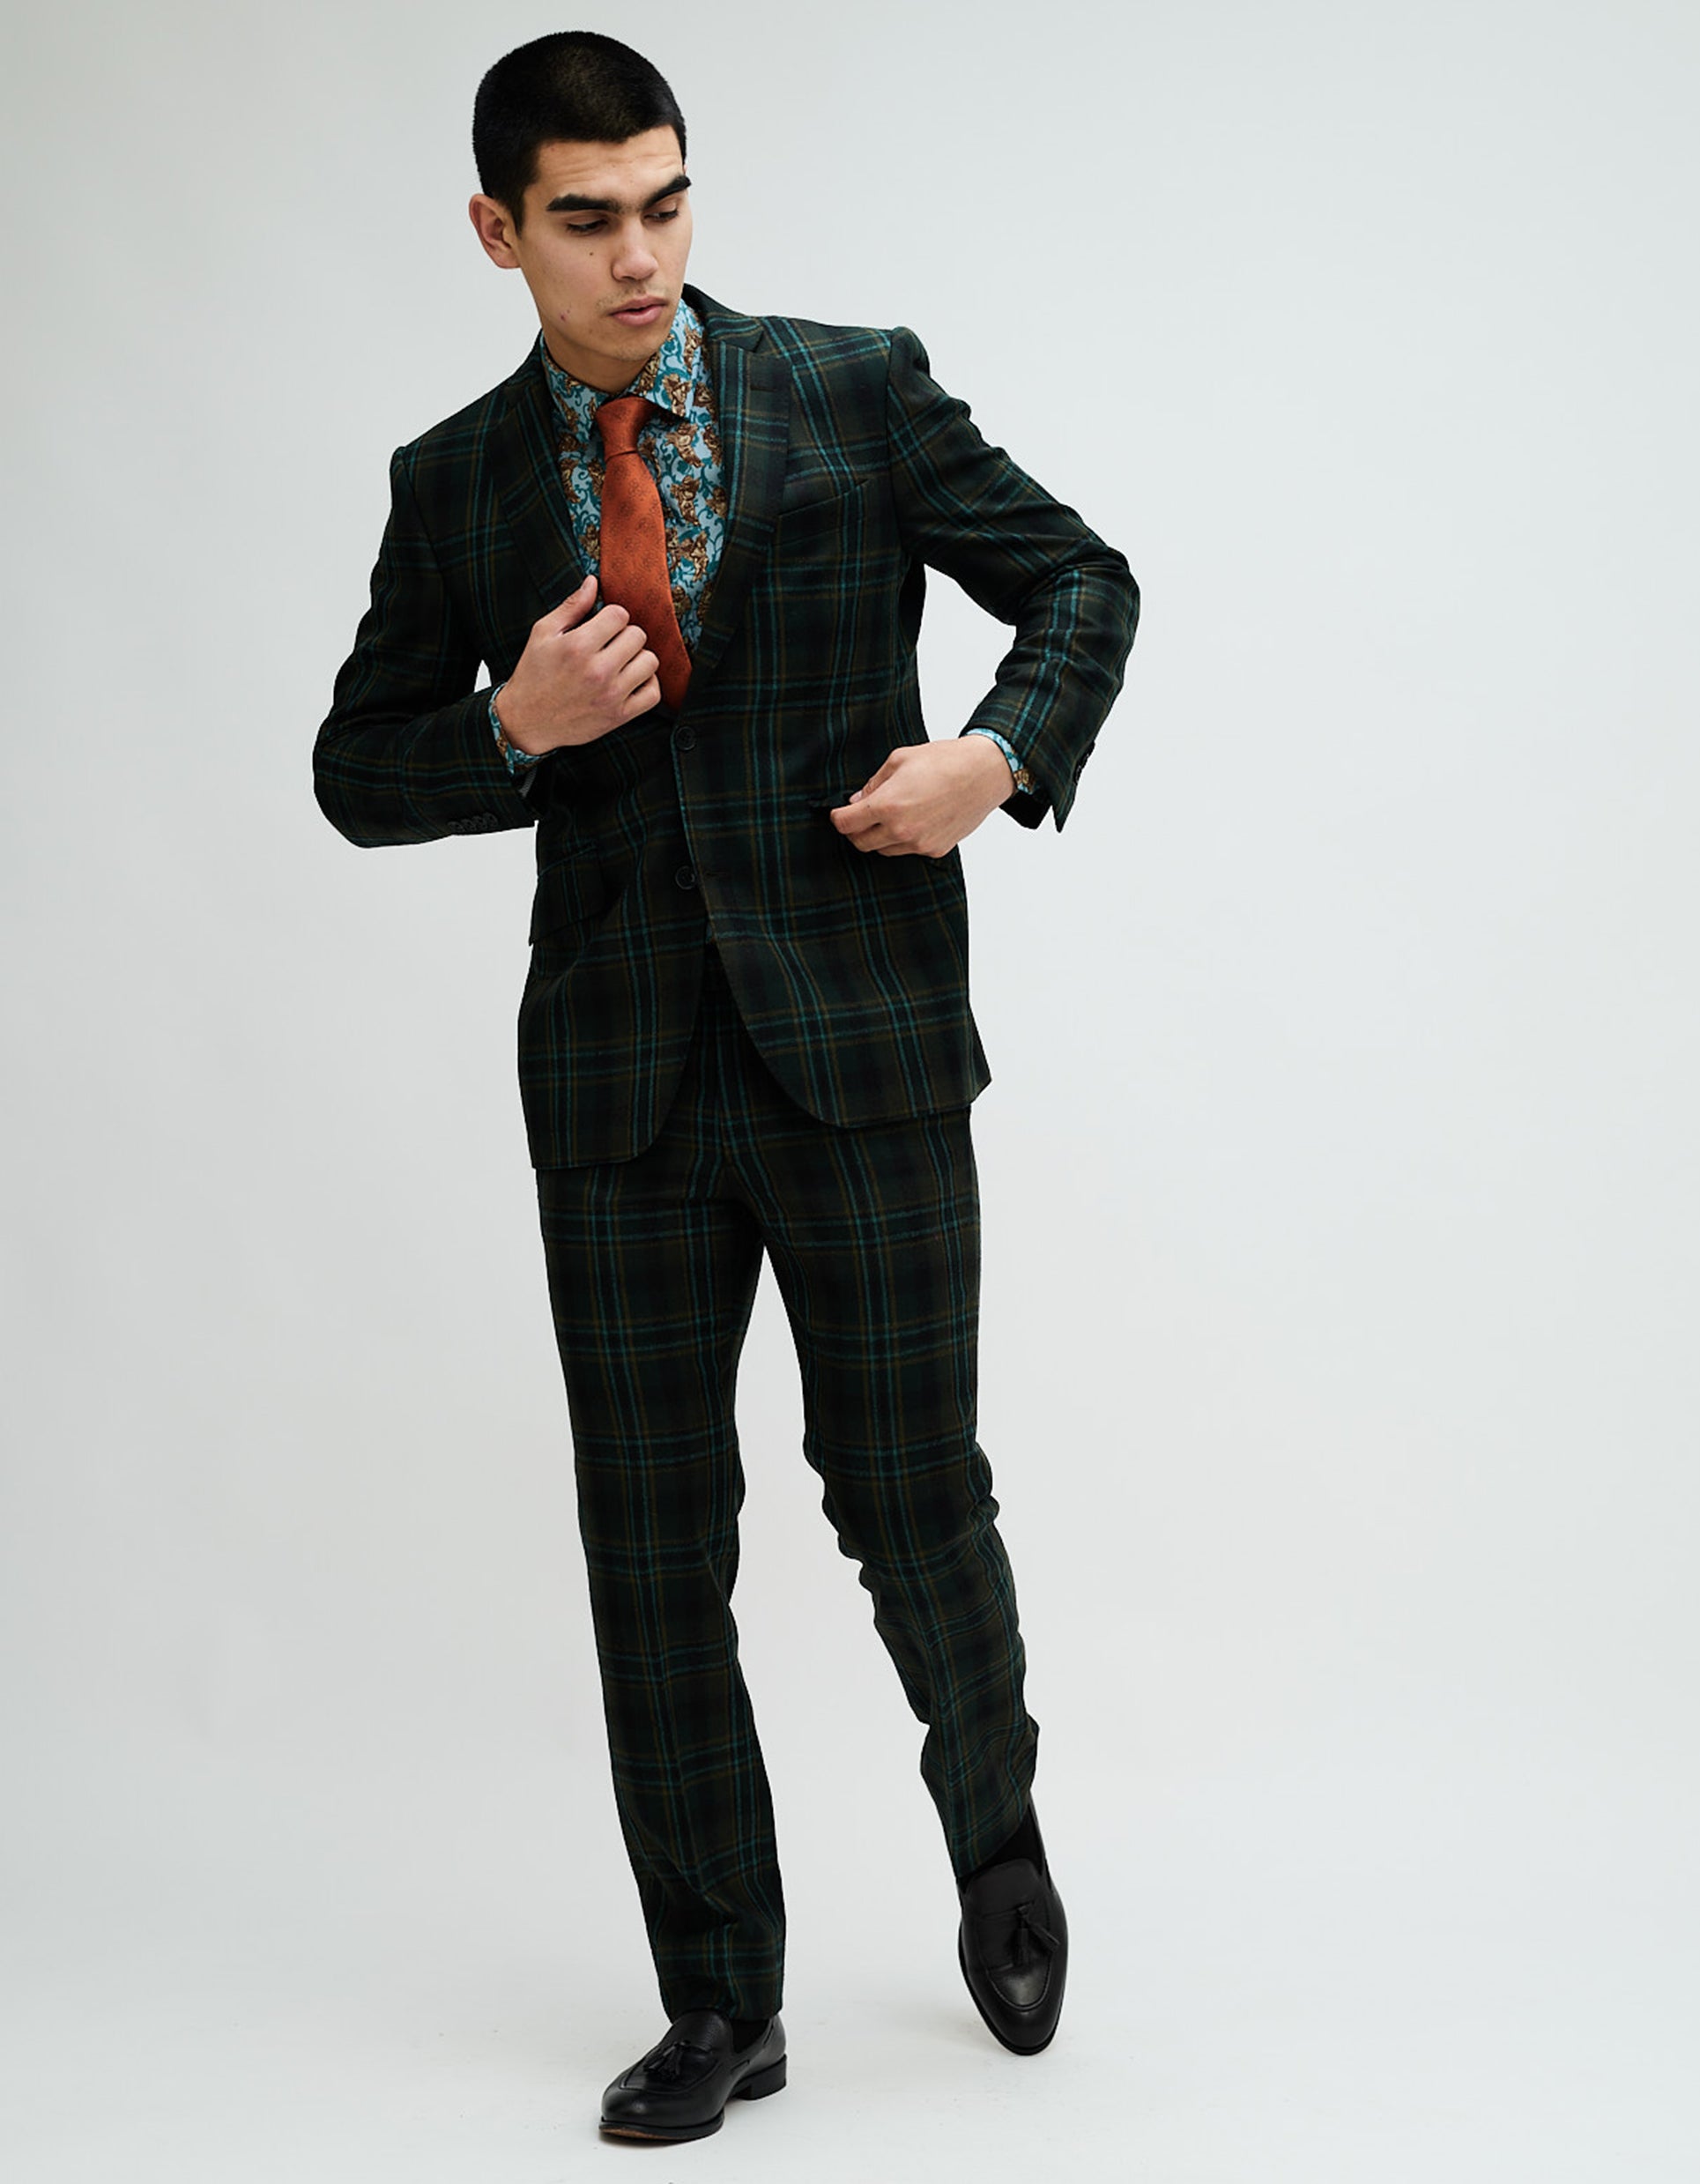 Green Check Suit Mens
